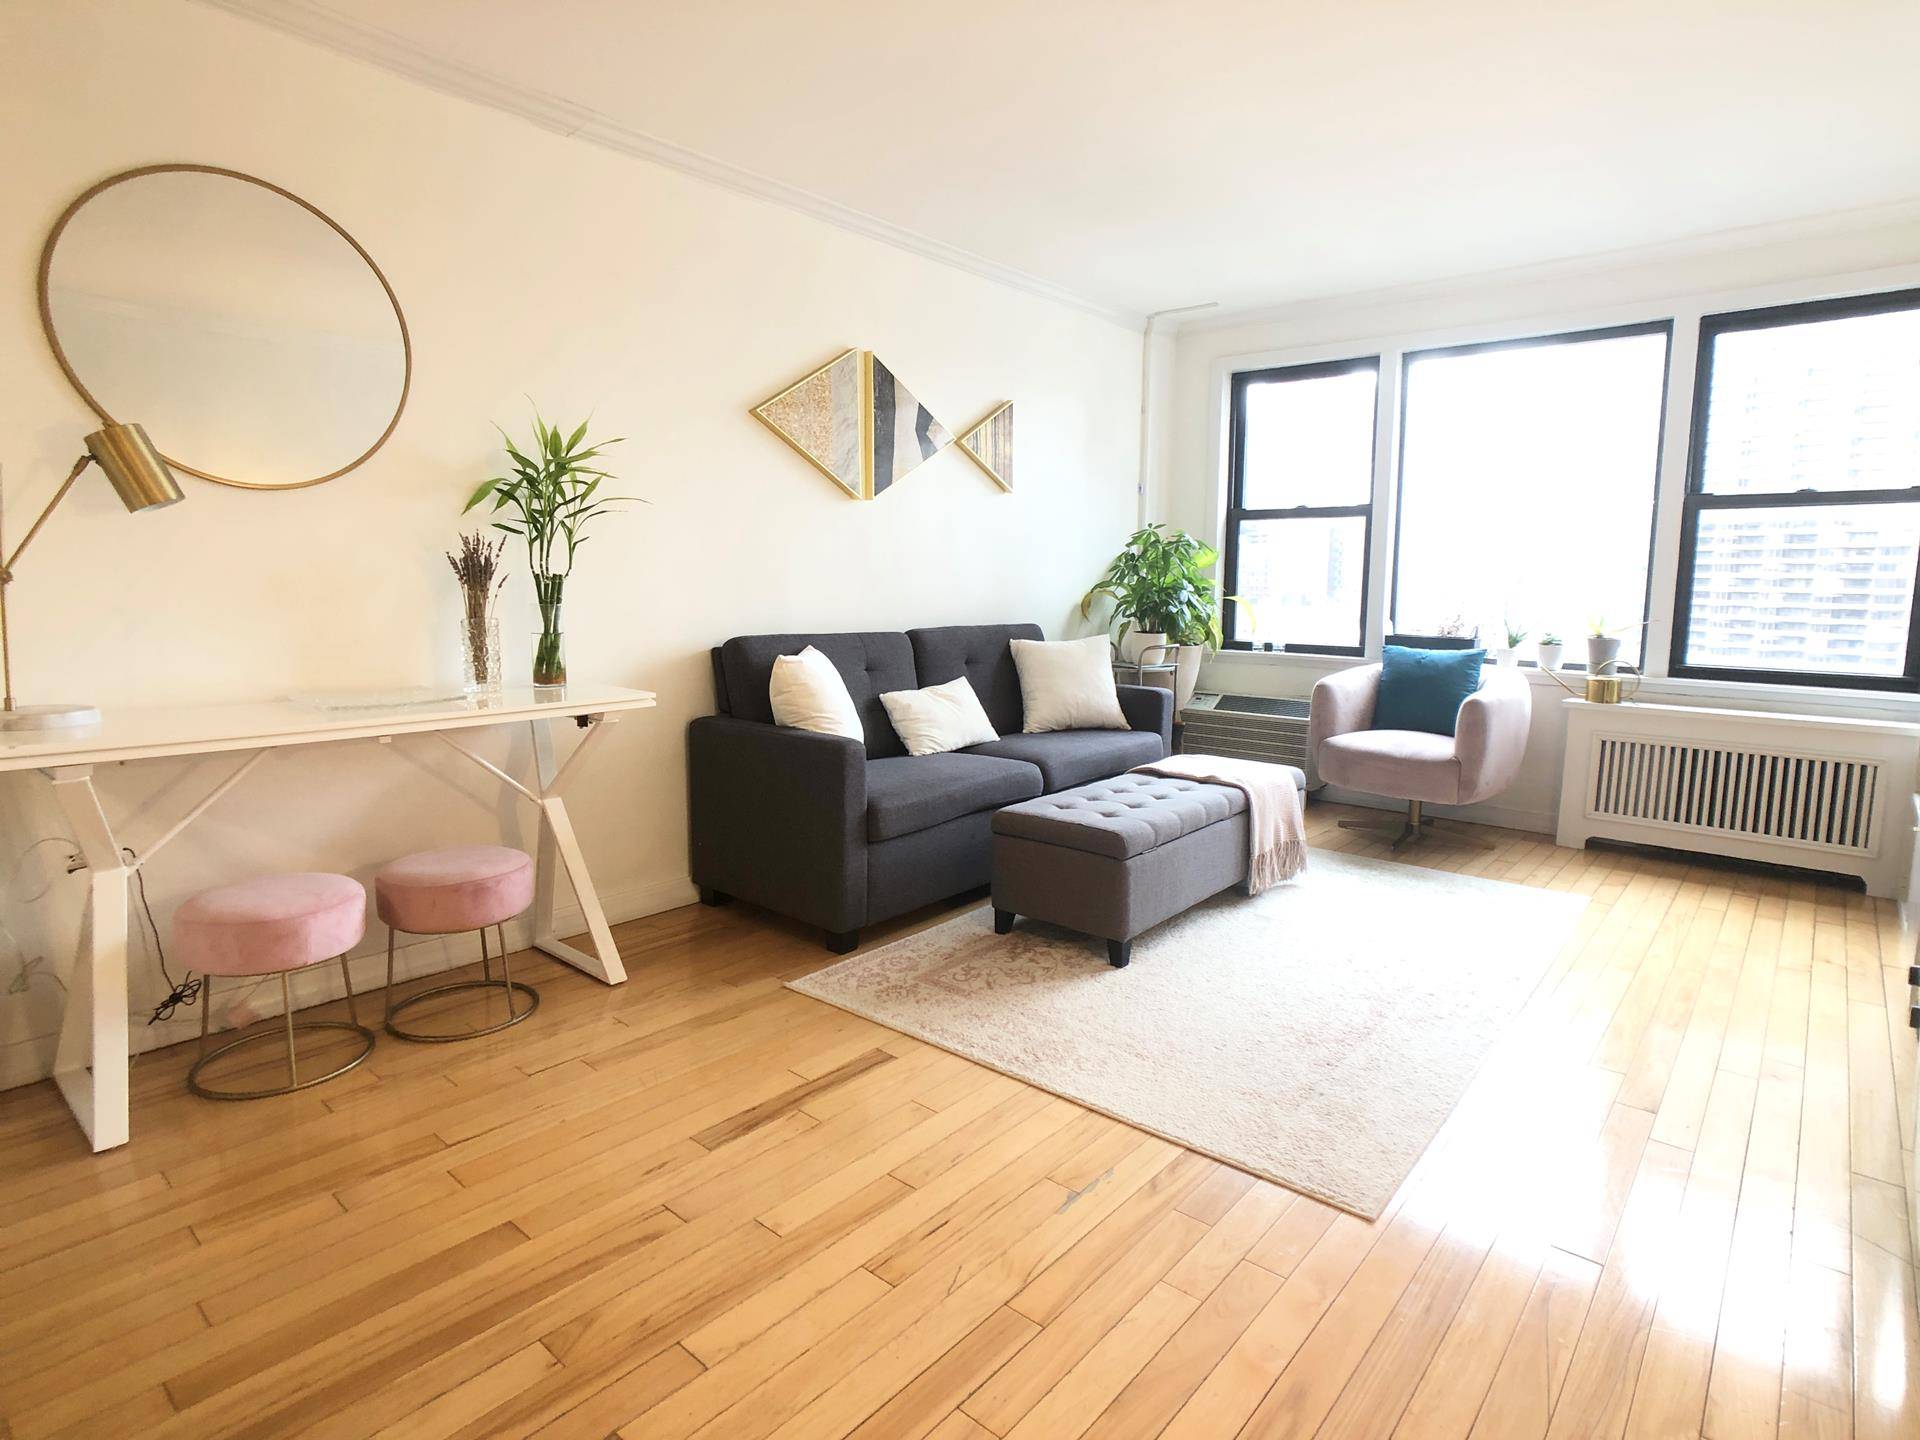 Beautifully updated one bedroom apartment offers an expansive floor plan with an open chef's kitchen, stainless steel appliances and generous breakfast bar.